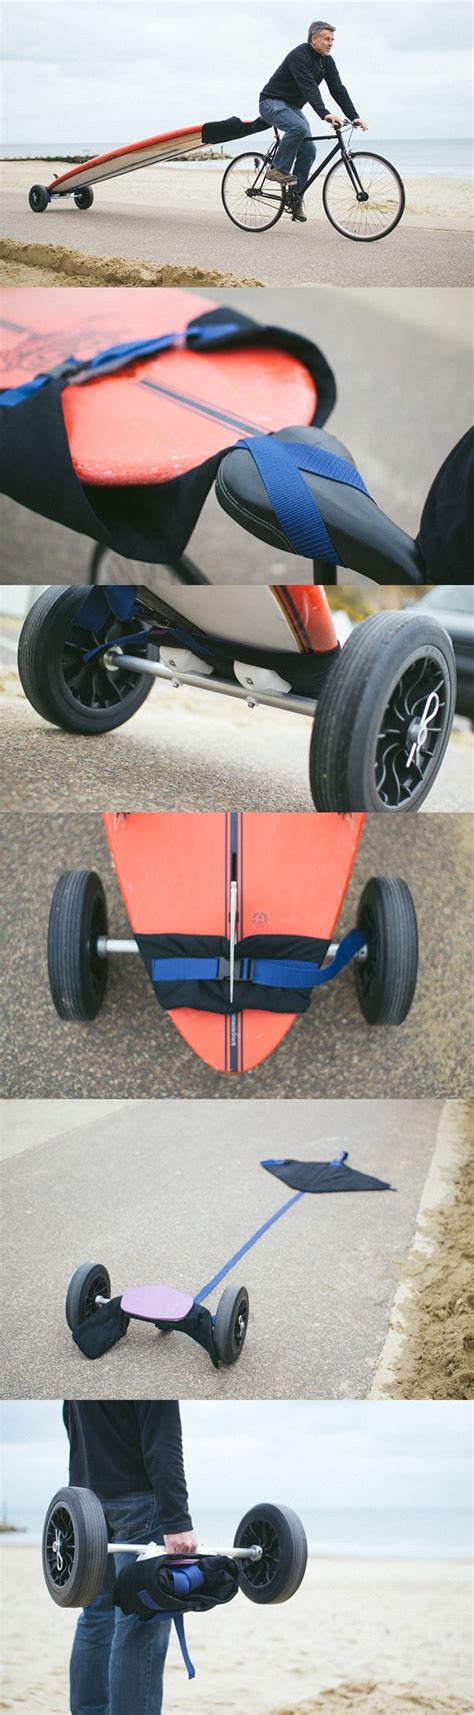 There are many diy bike trailer guides available on the internet. Awesome and easy DIY board carrier for bikes | Kayak accessories, Board carrier, Surfing